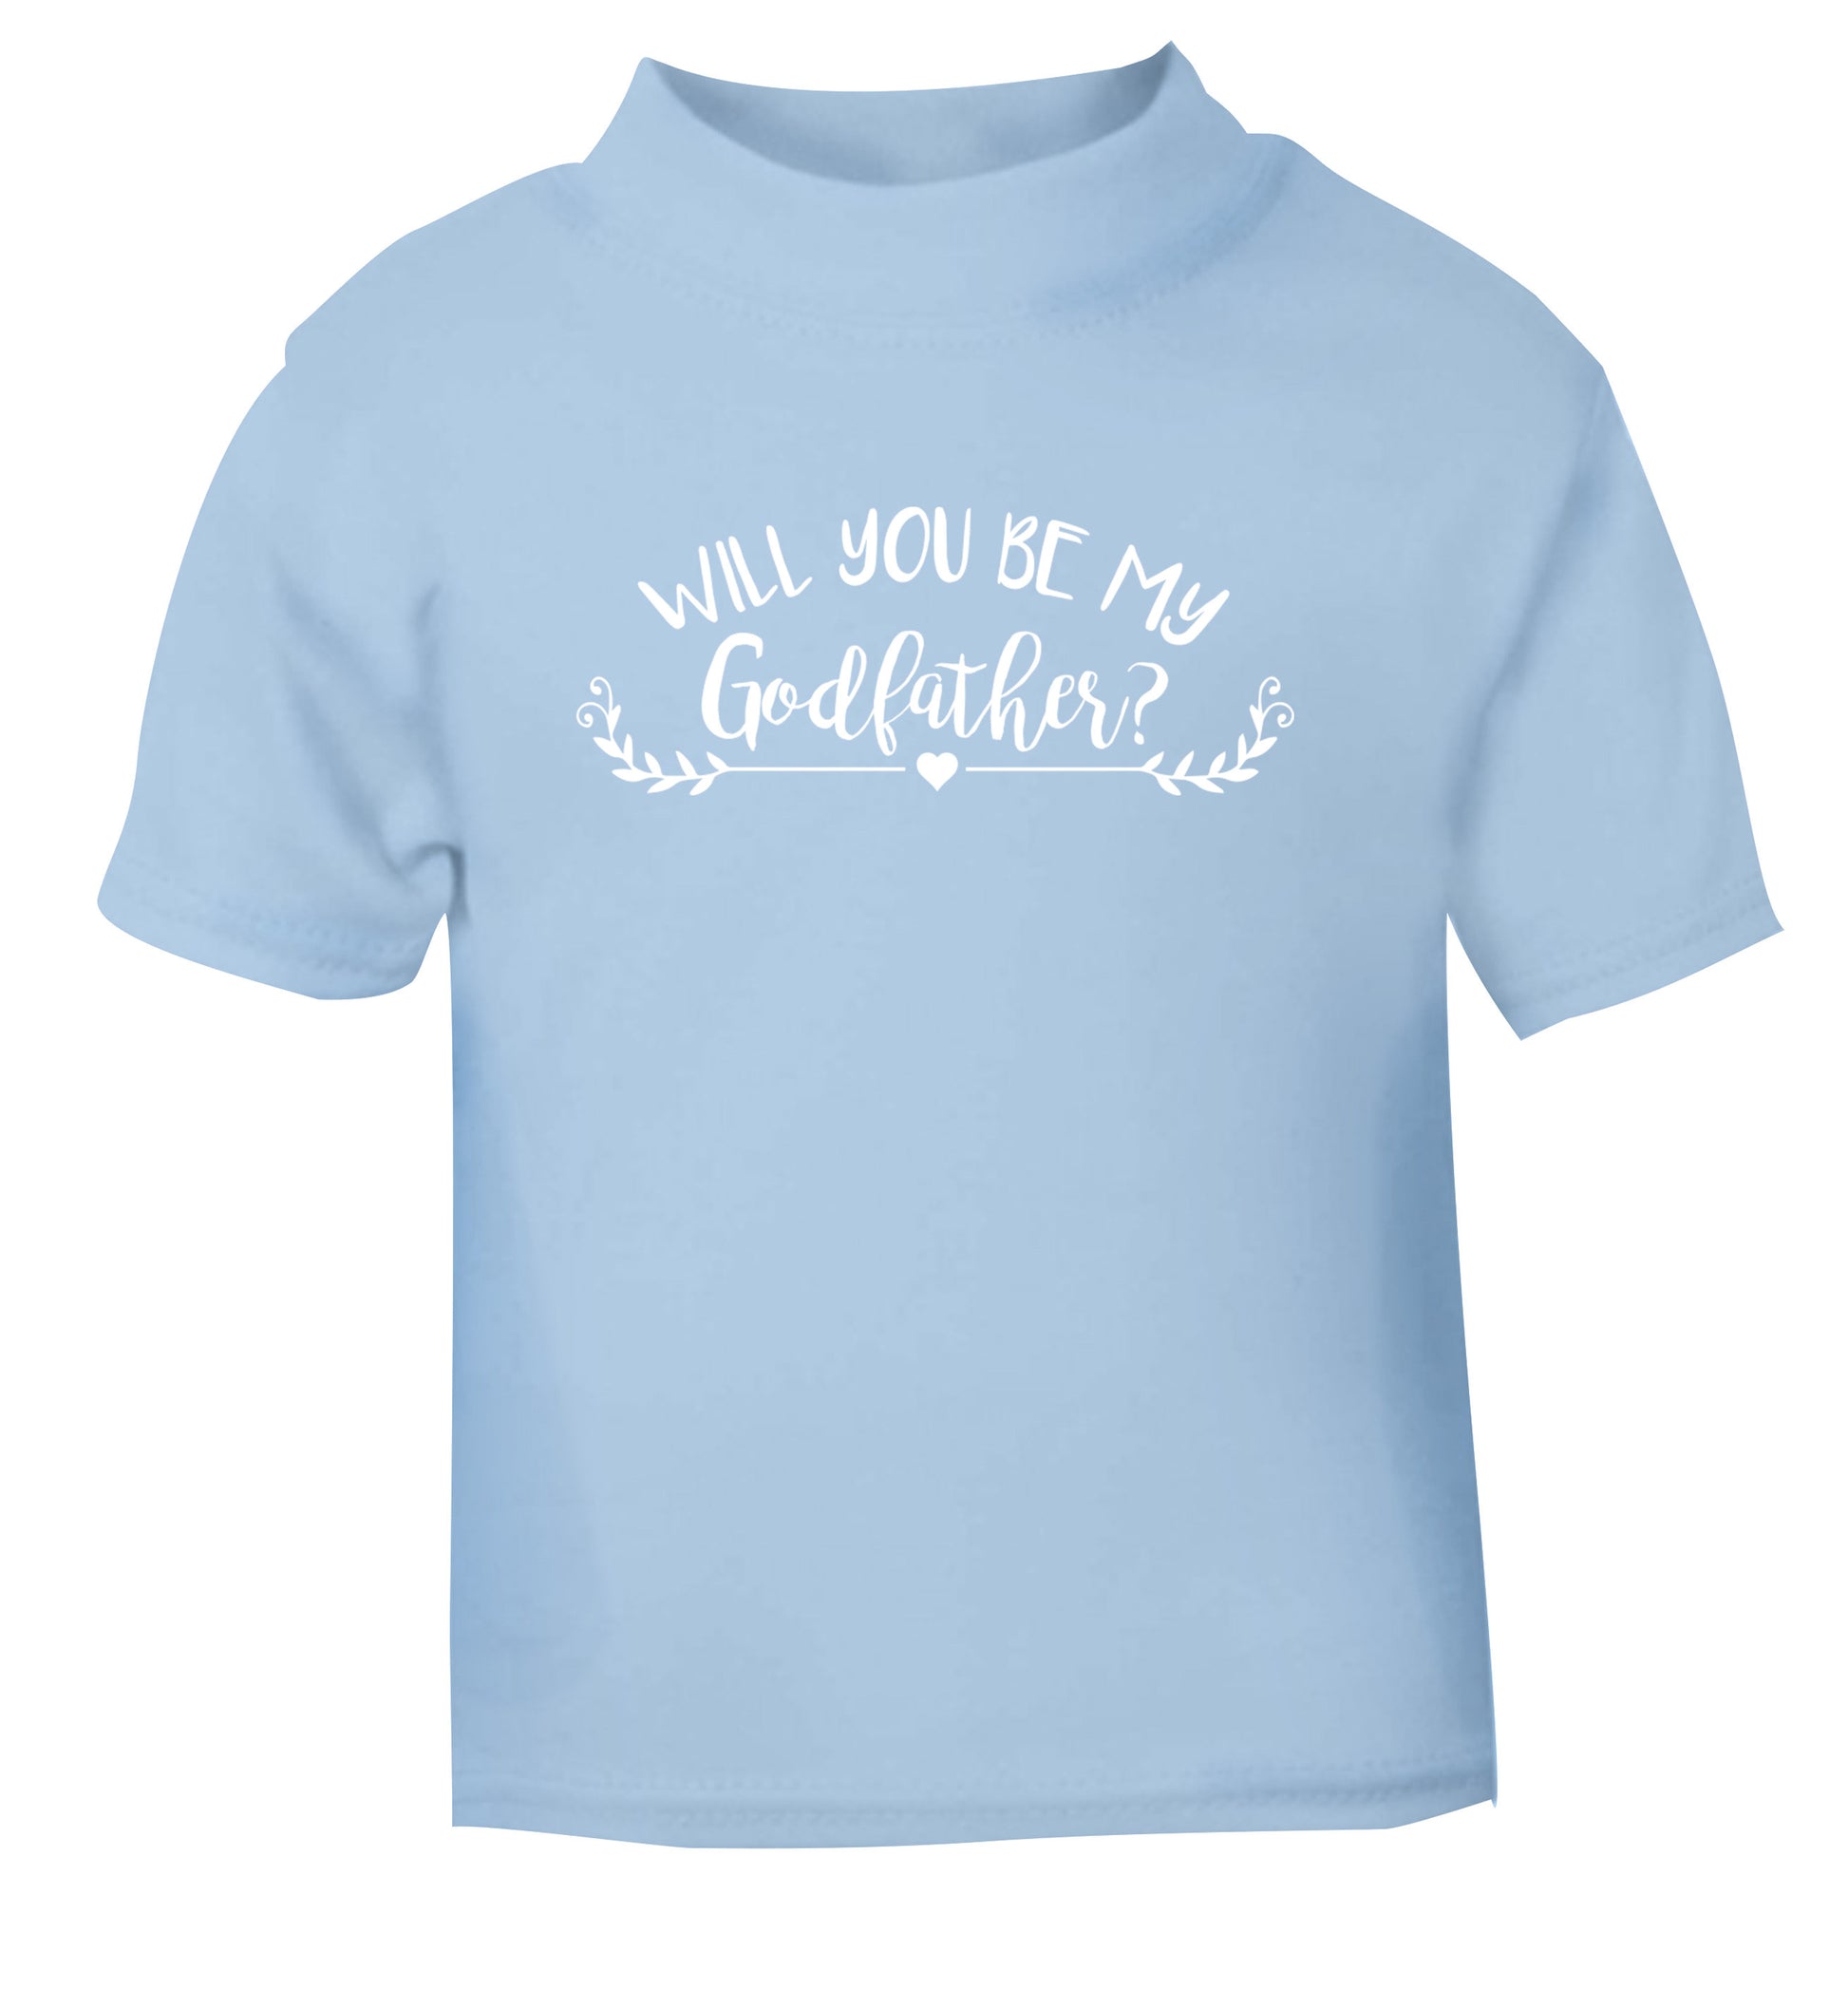 Will you be my godfather? light blue Baby Toddler Tshirt 2 Years